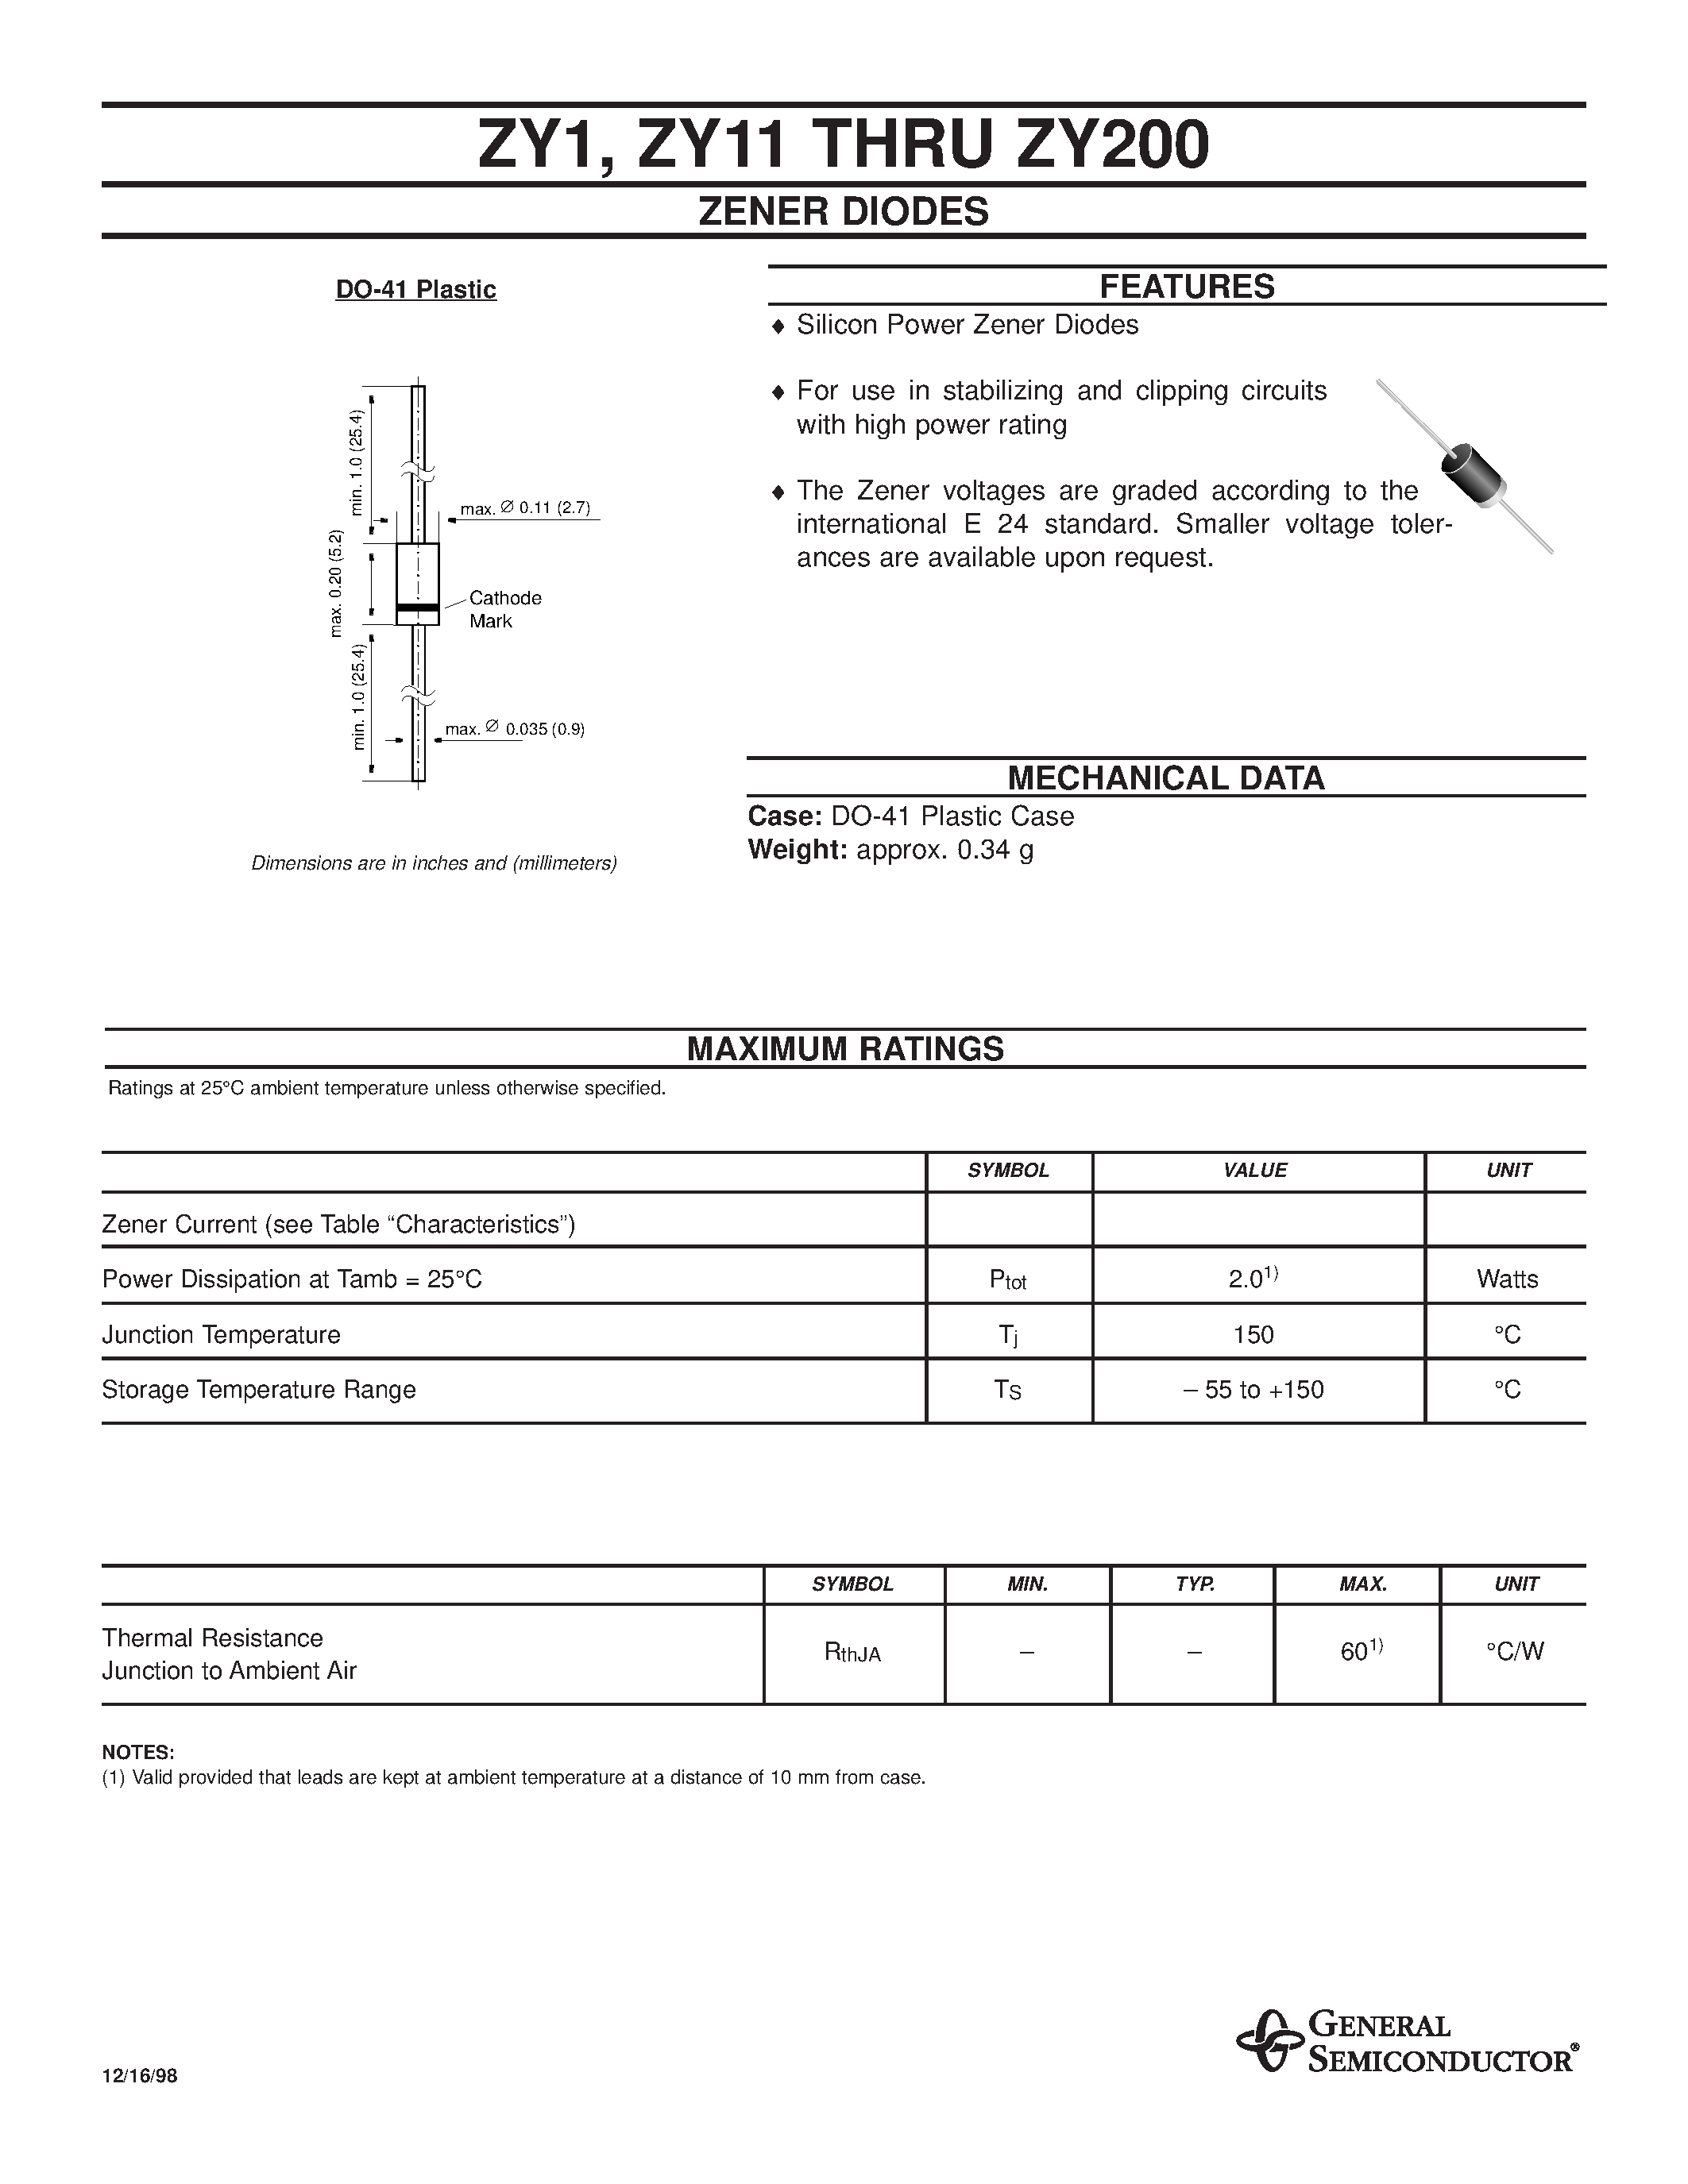 Datasheet ZY56 - ZENER DIODES page 1